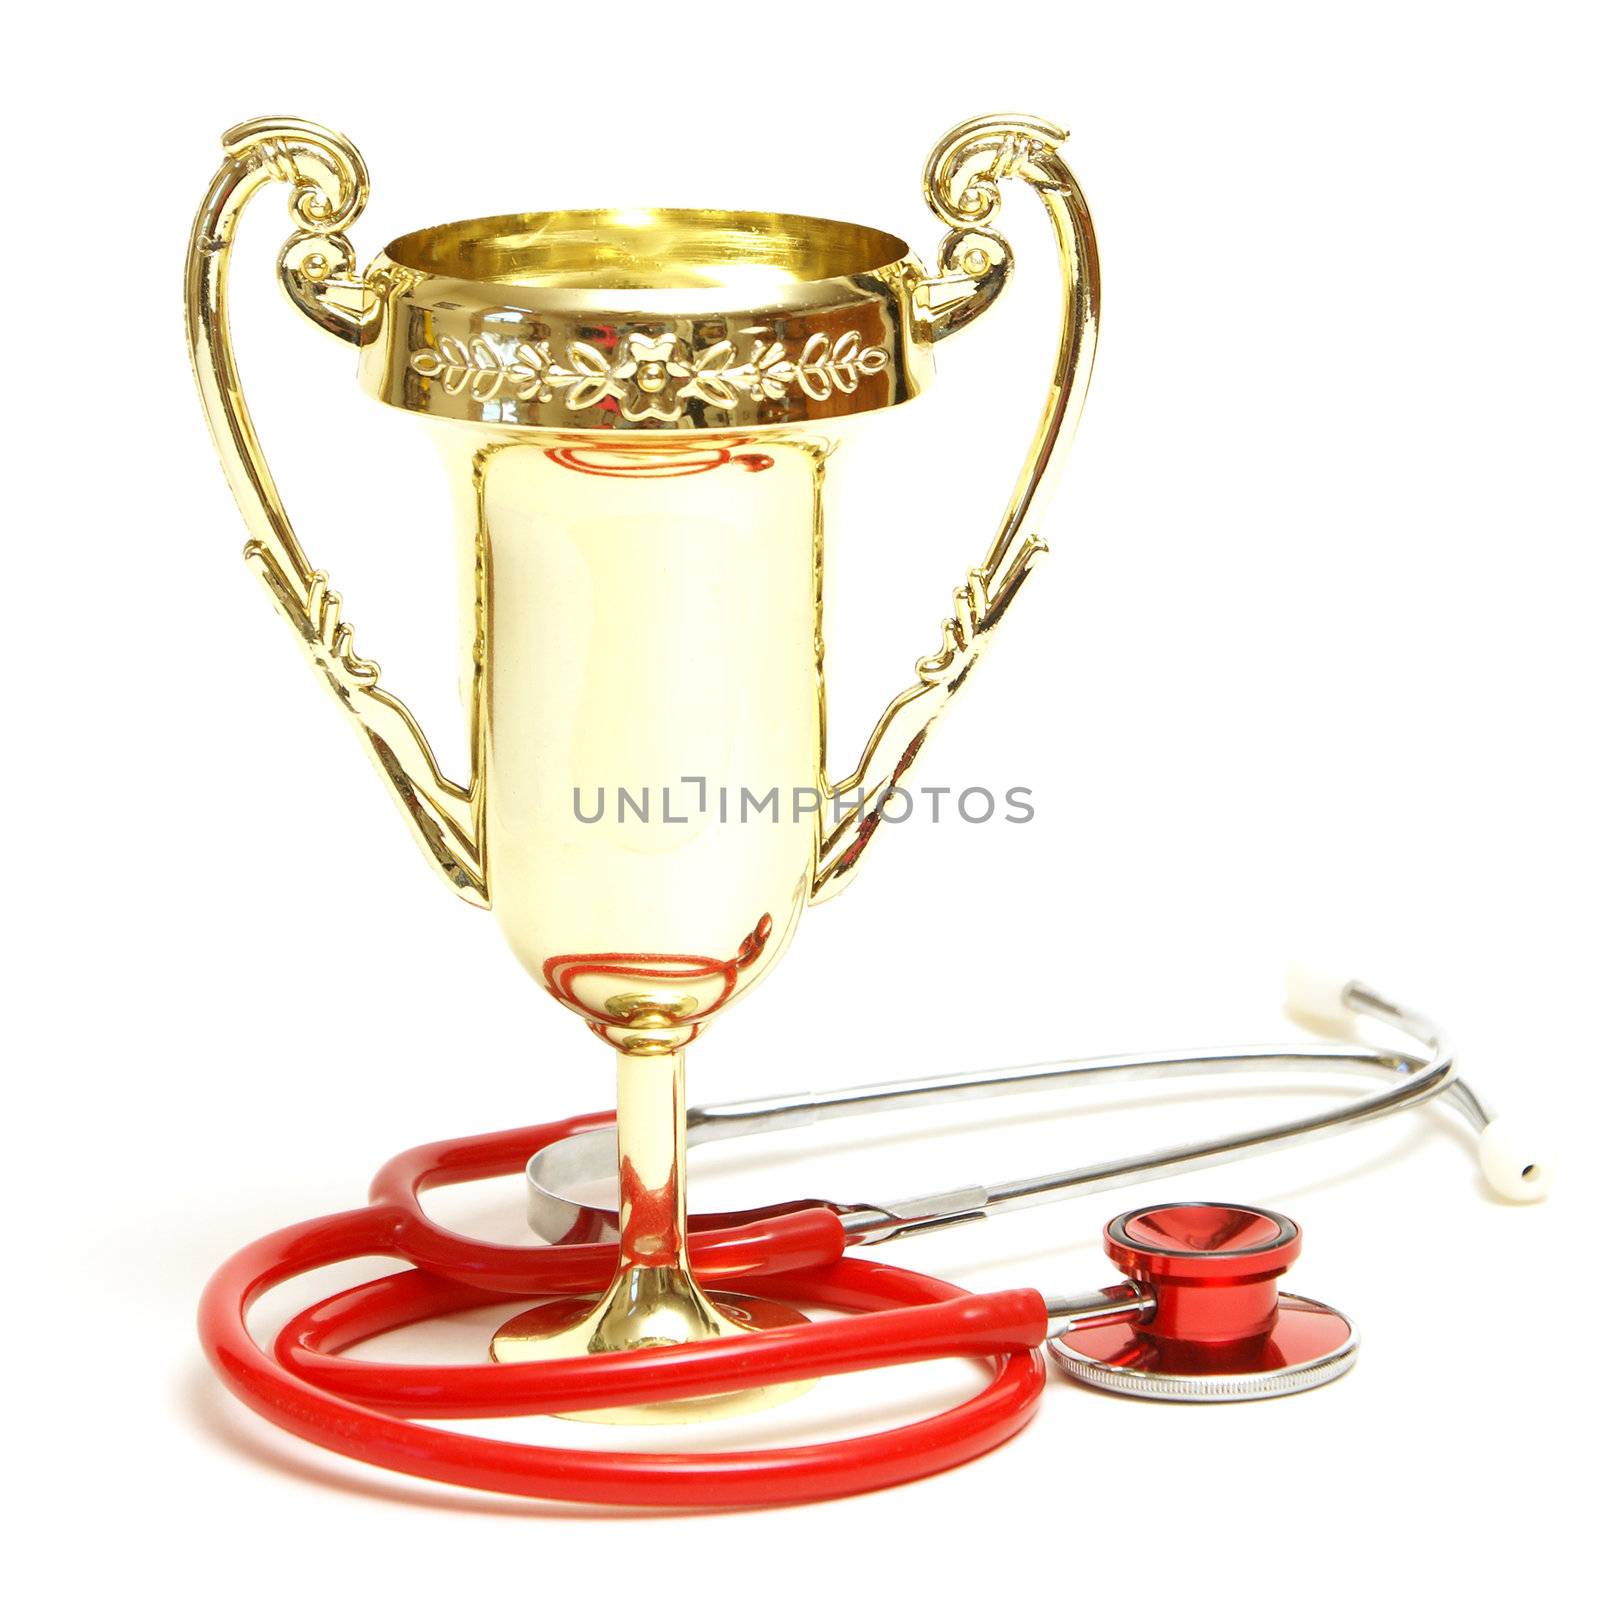 A trophy and stethoscope represent some award winning healthcare professionals.